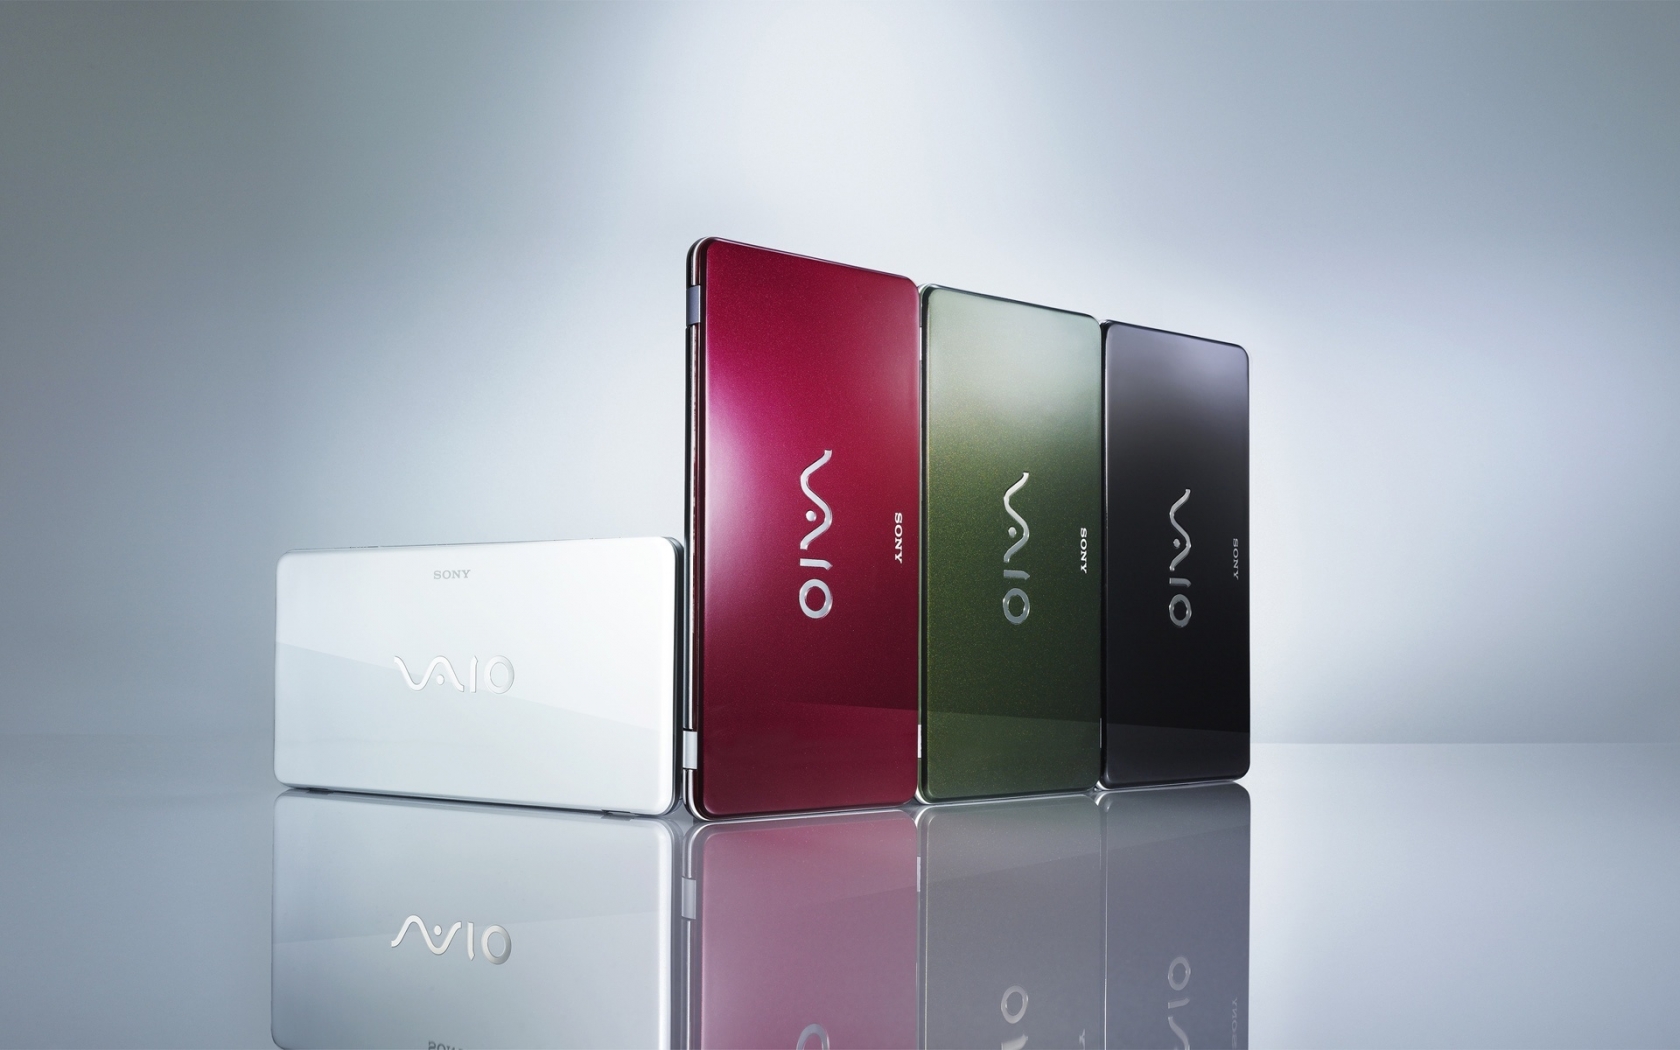 Sony Vaio 4 colors for 1680 x 1050 widescreen resolution